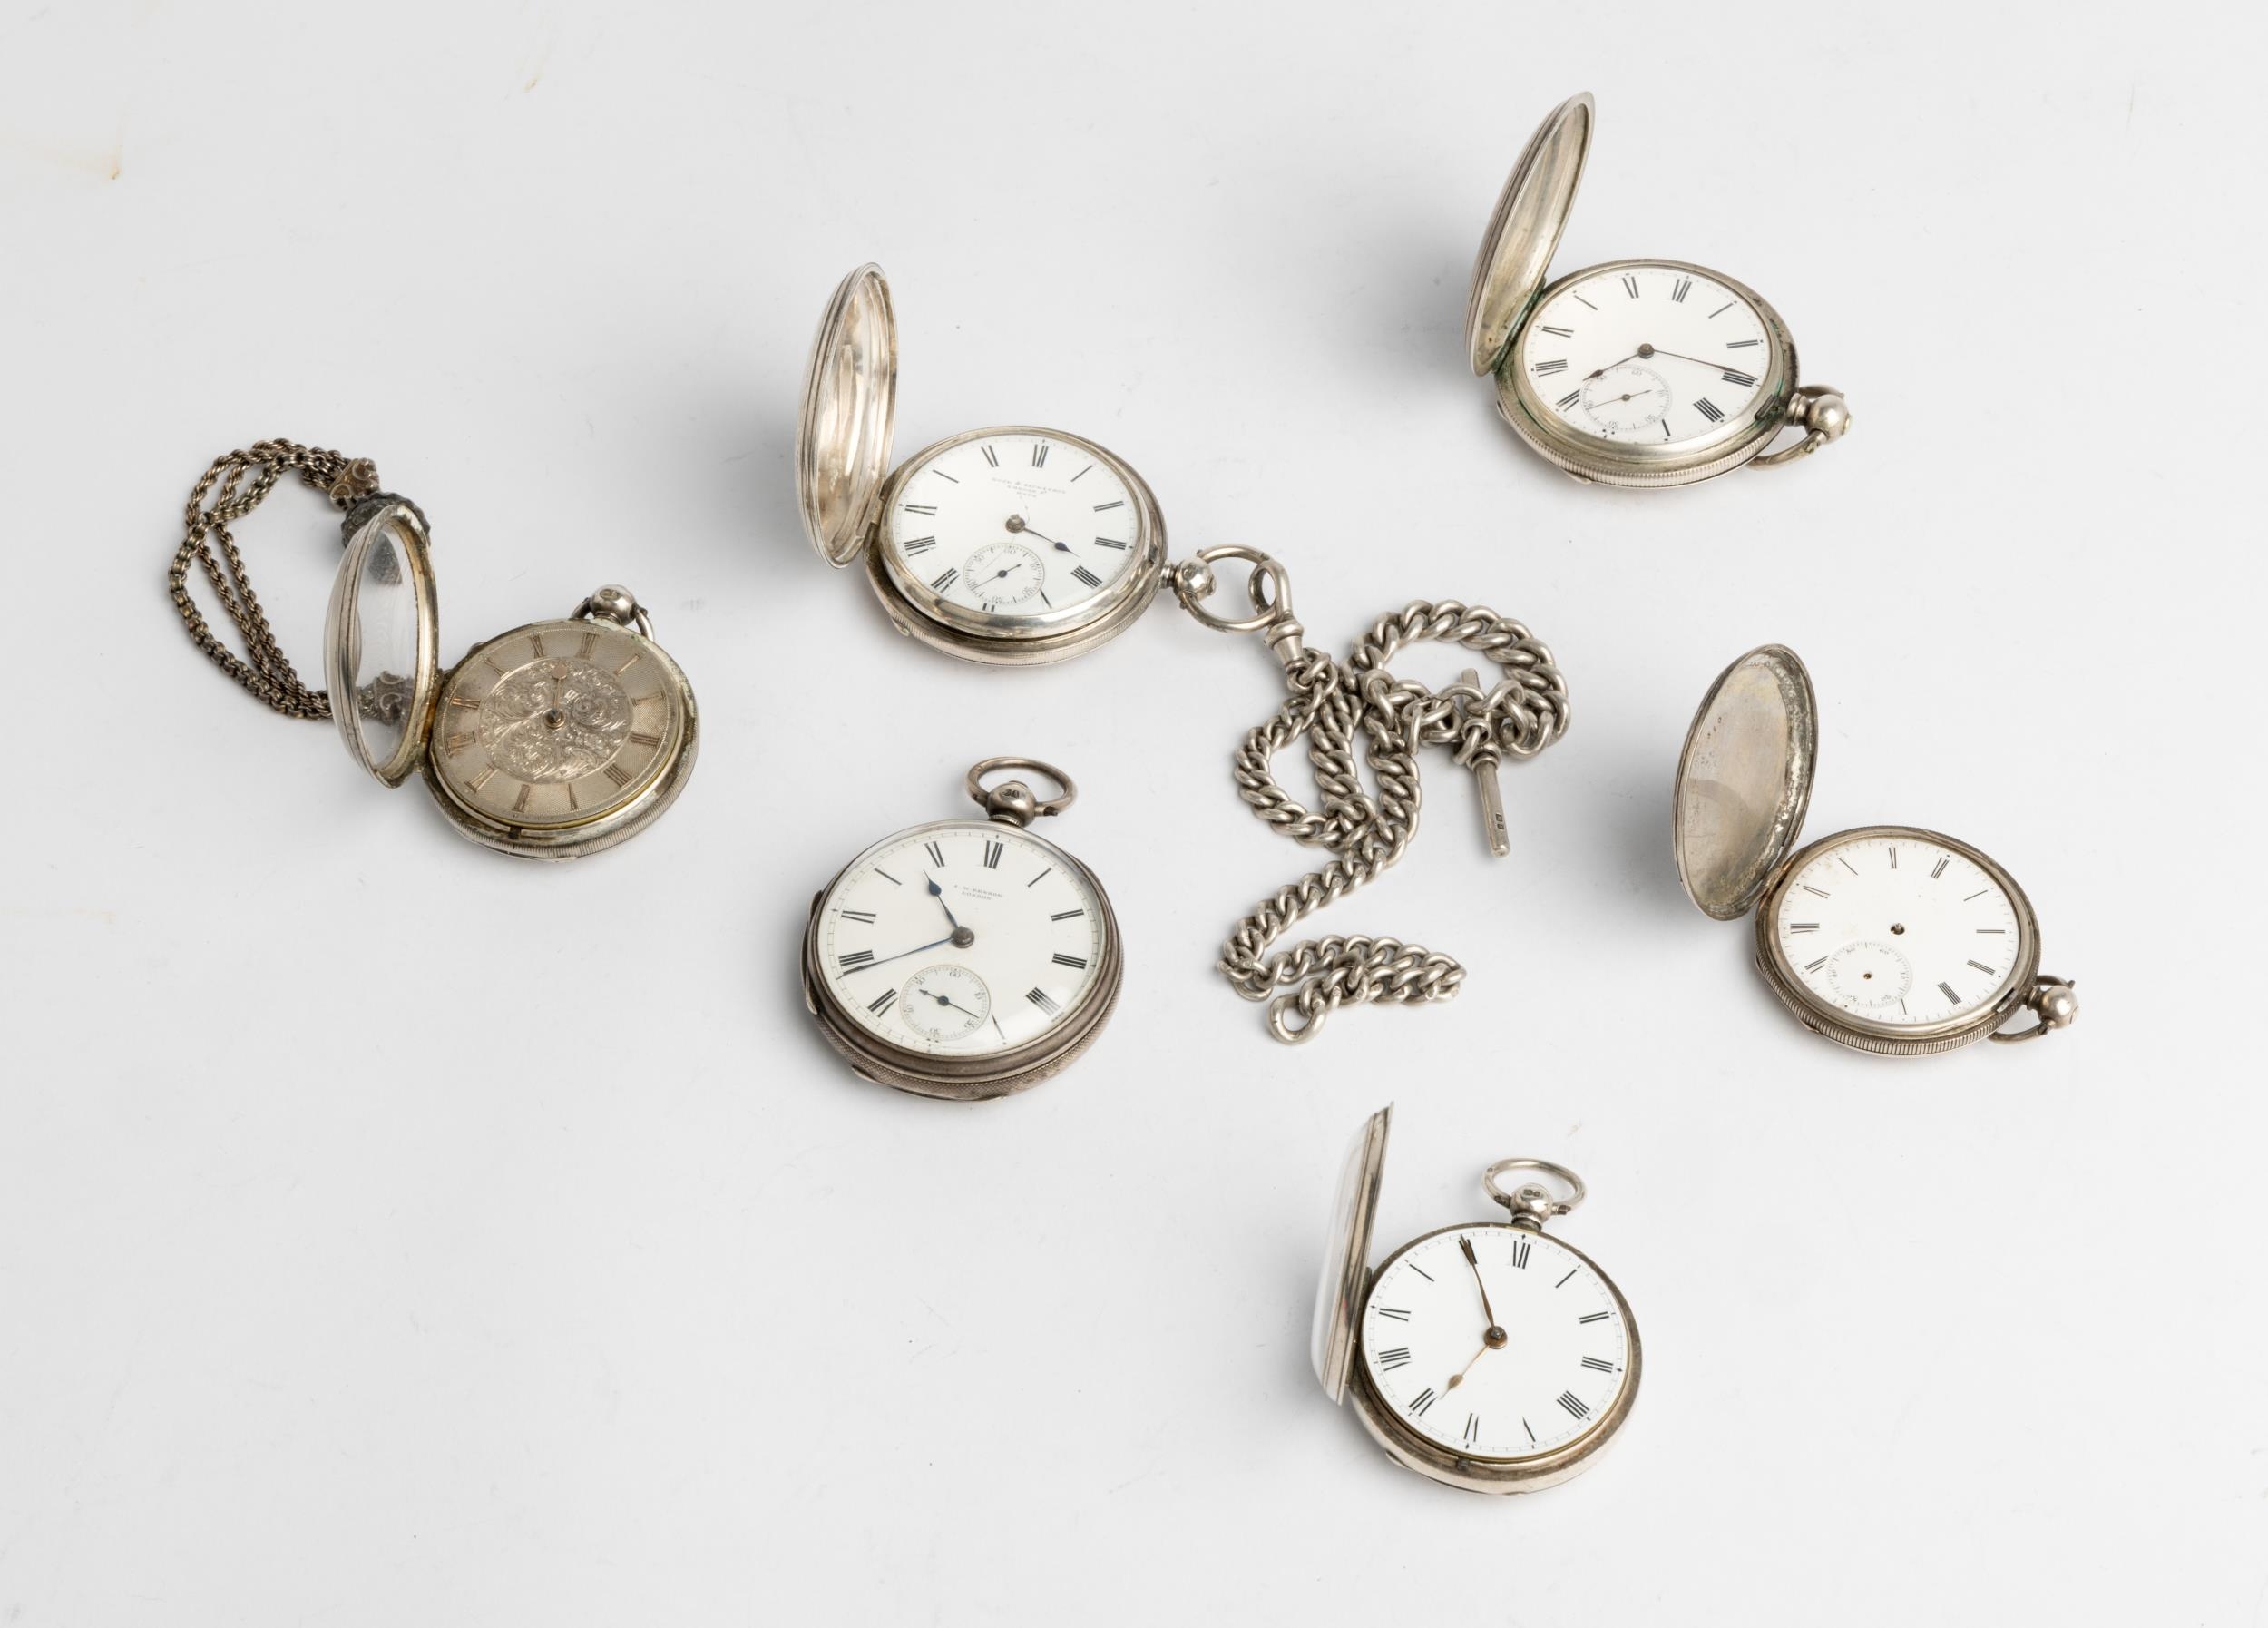 SIX VARIOUS SILVER WATCHES. 3 hunting cased, 3 open faced and 2 chains. (6) - Image 2 of 3